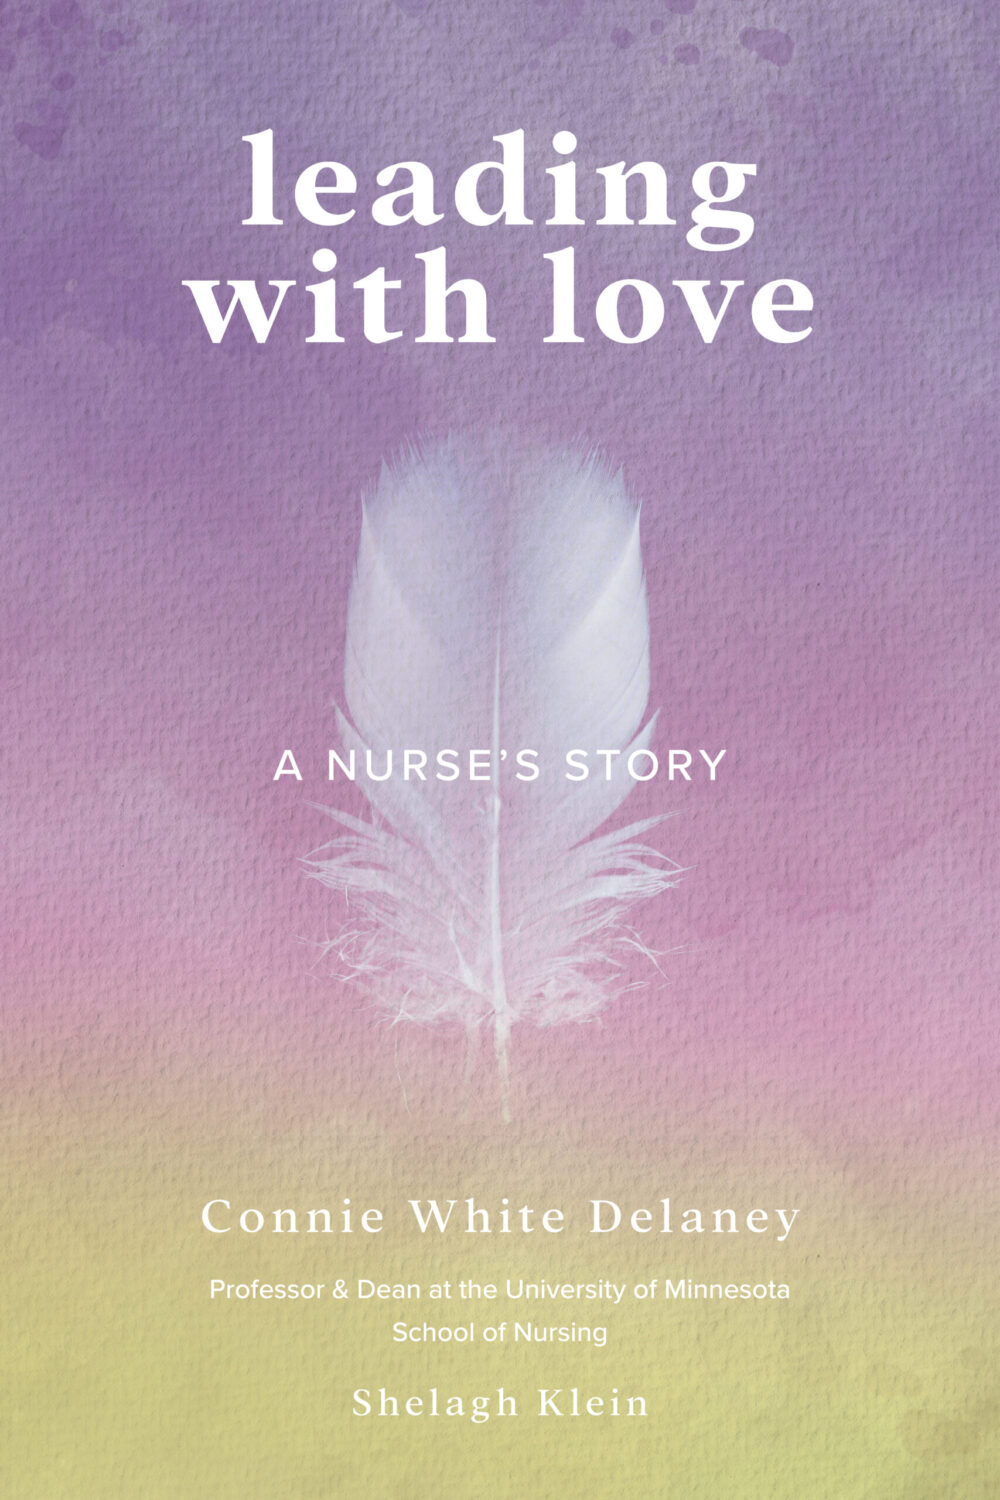 leading with love book cover